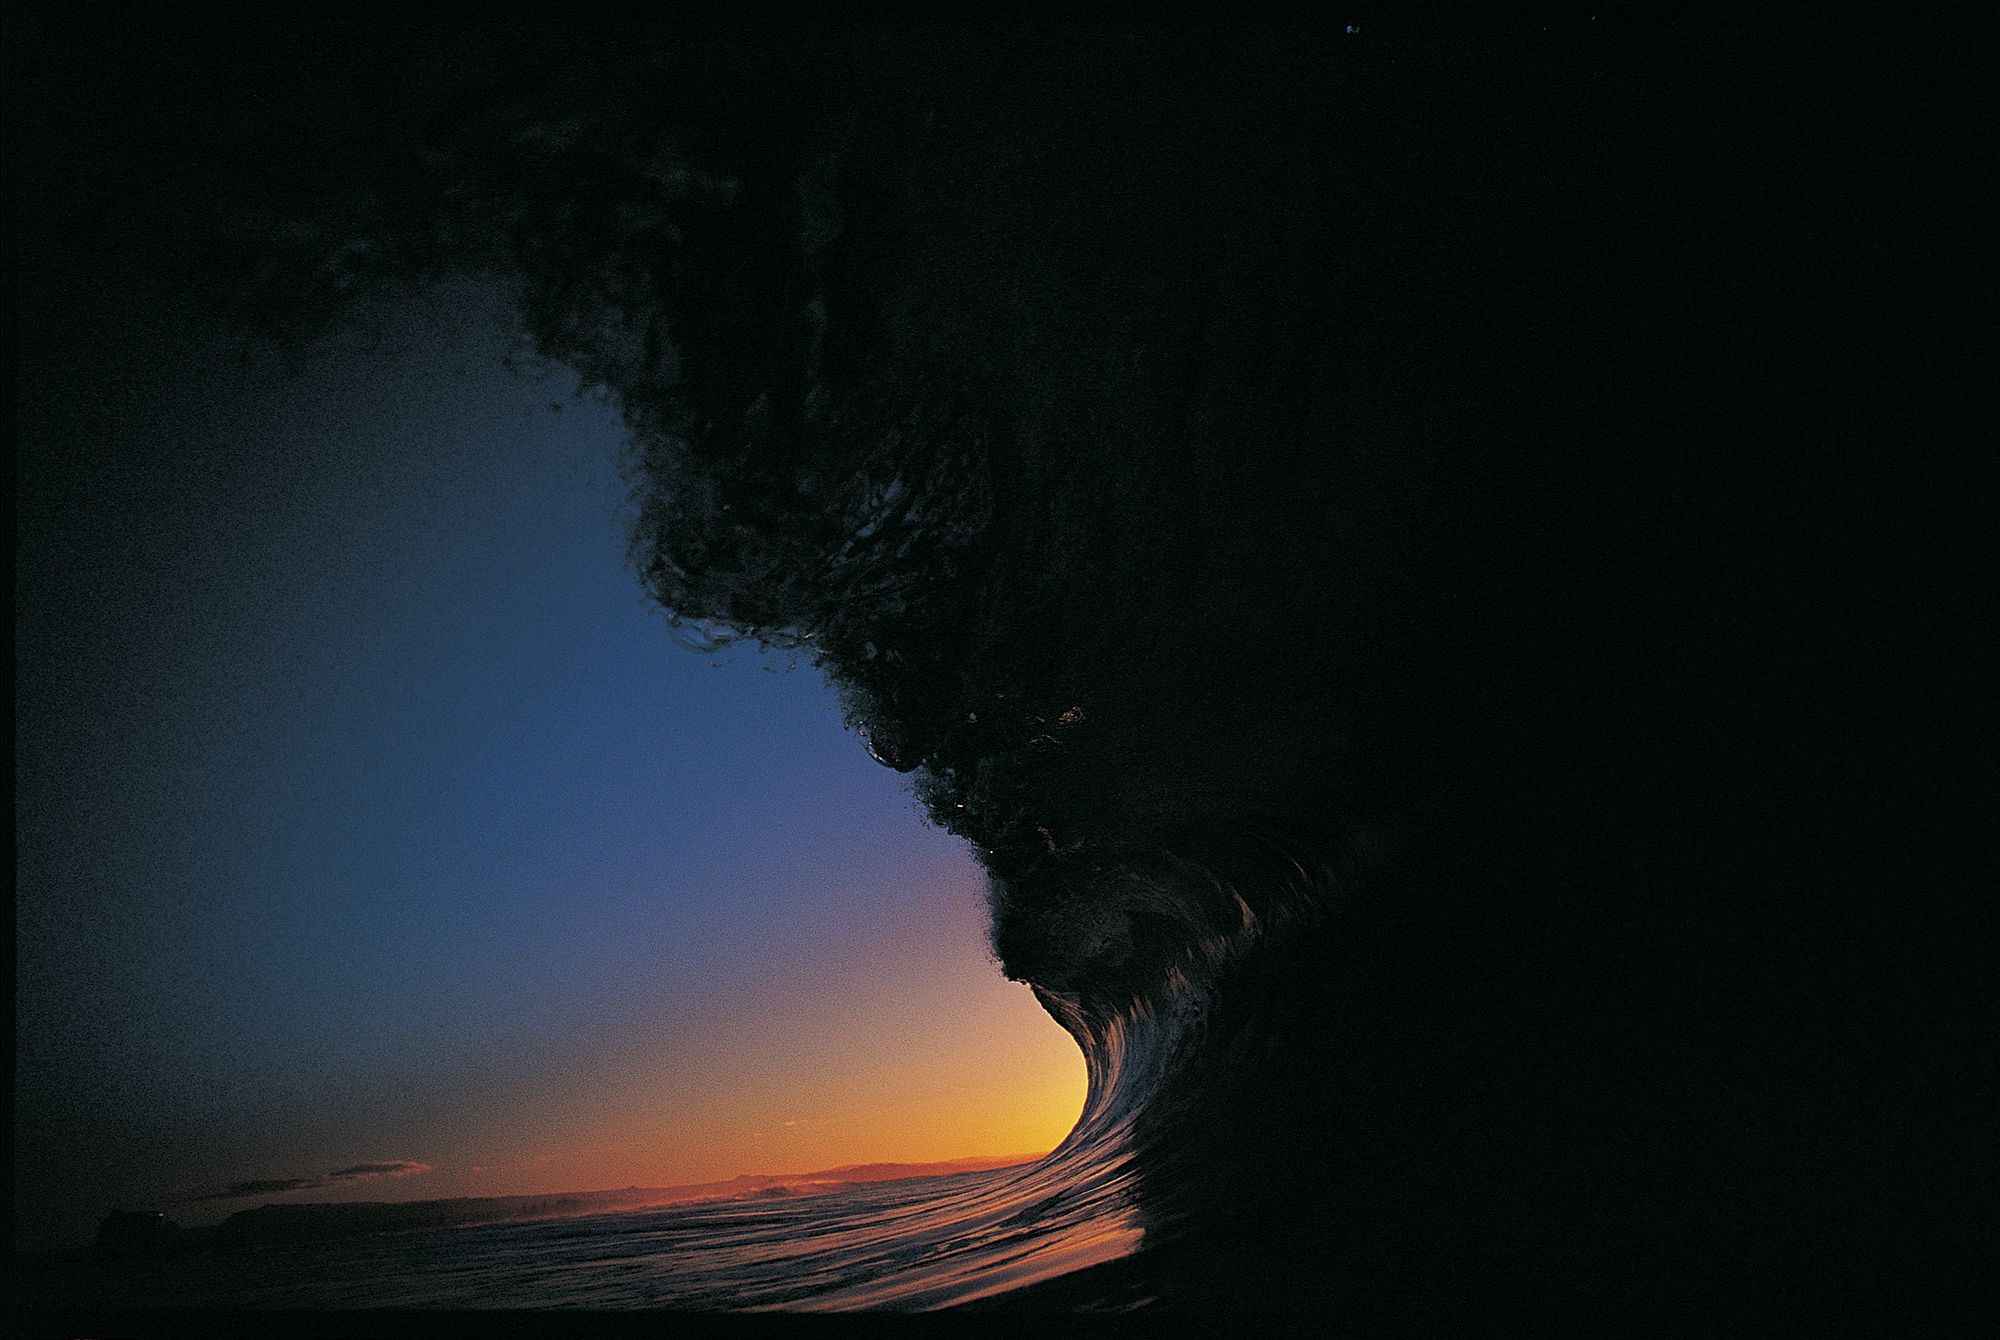 fiery sunset viewed from within an enormous dark wave resembling a man's face